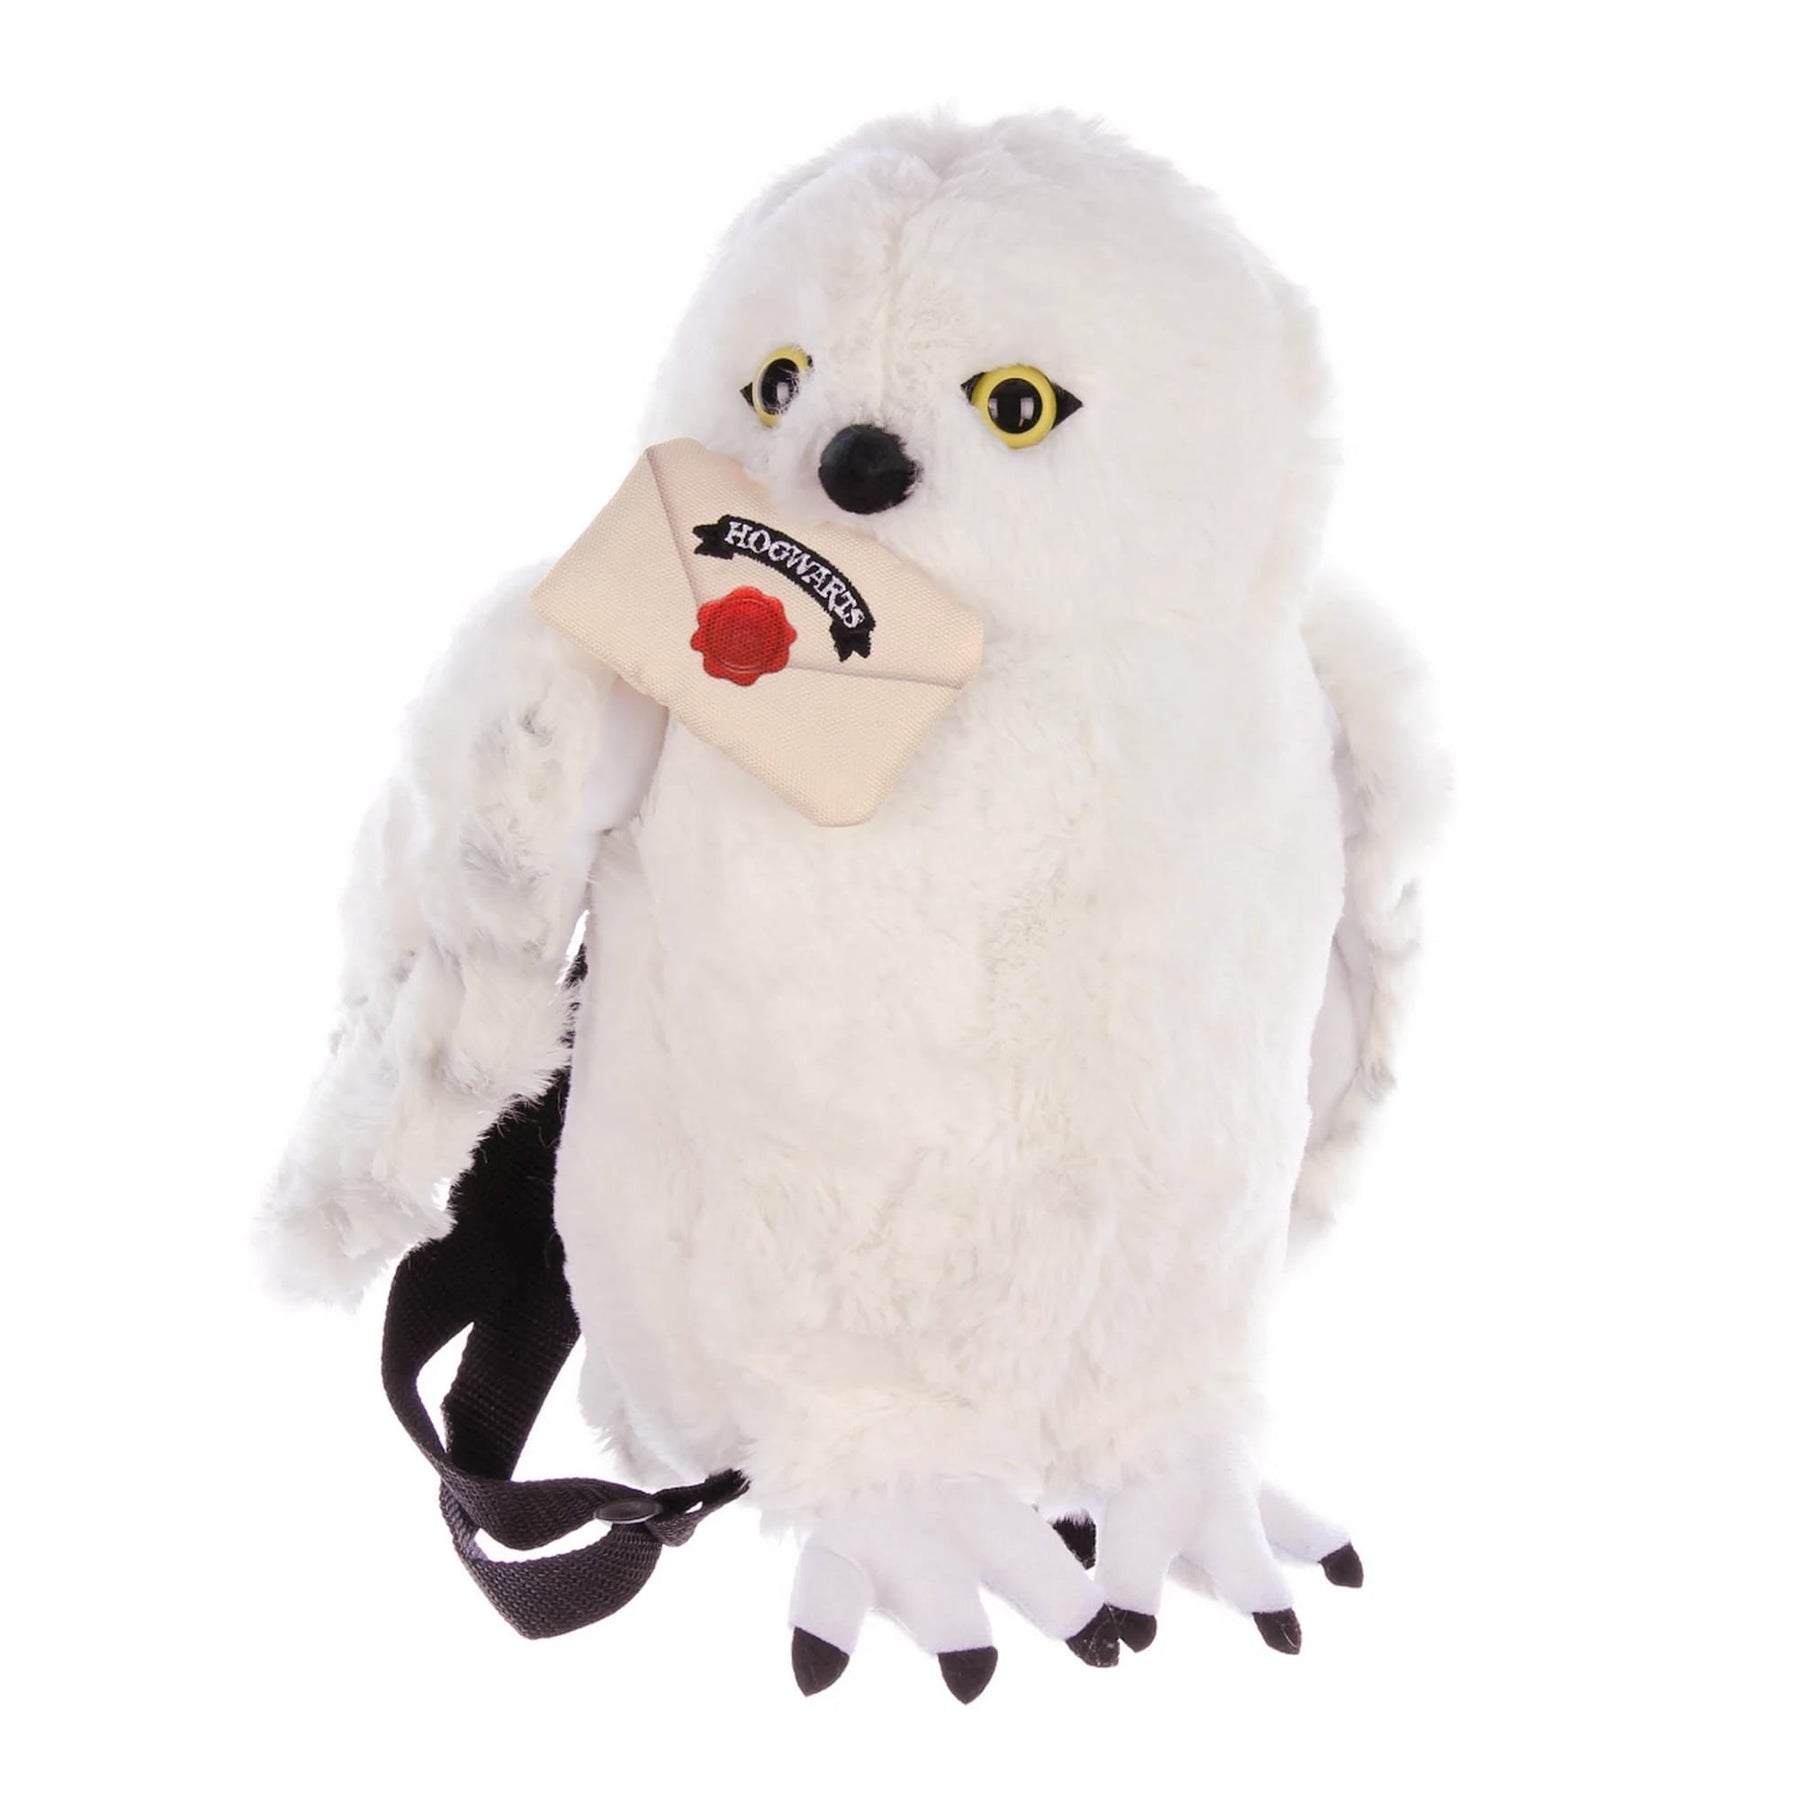 Harry Potter Hedwig The Owl 17 Inch Plush Backpack